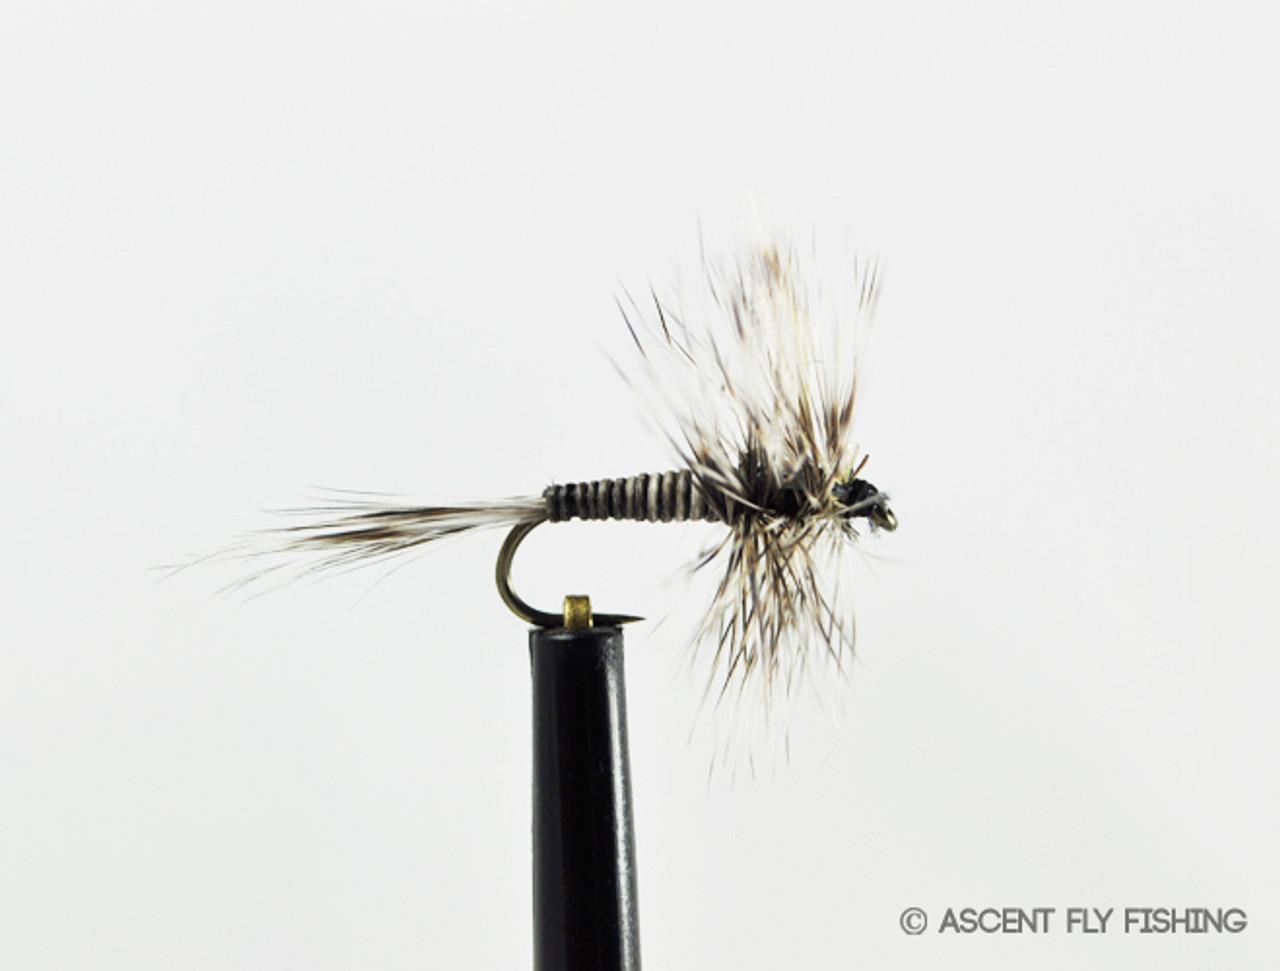 Mosquito Dry Fly - Ascent Fly Fishing